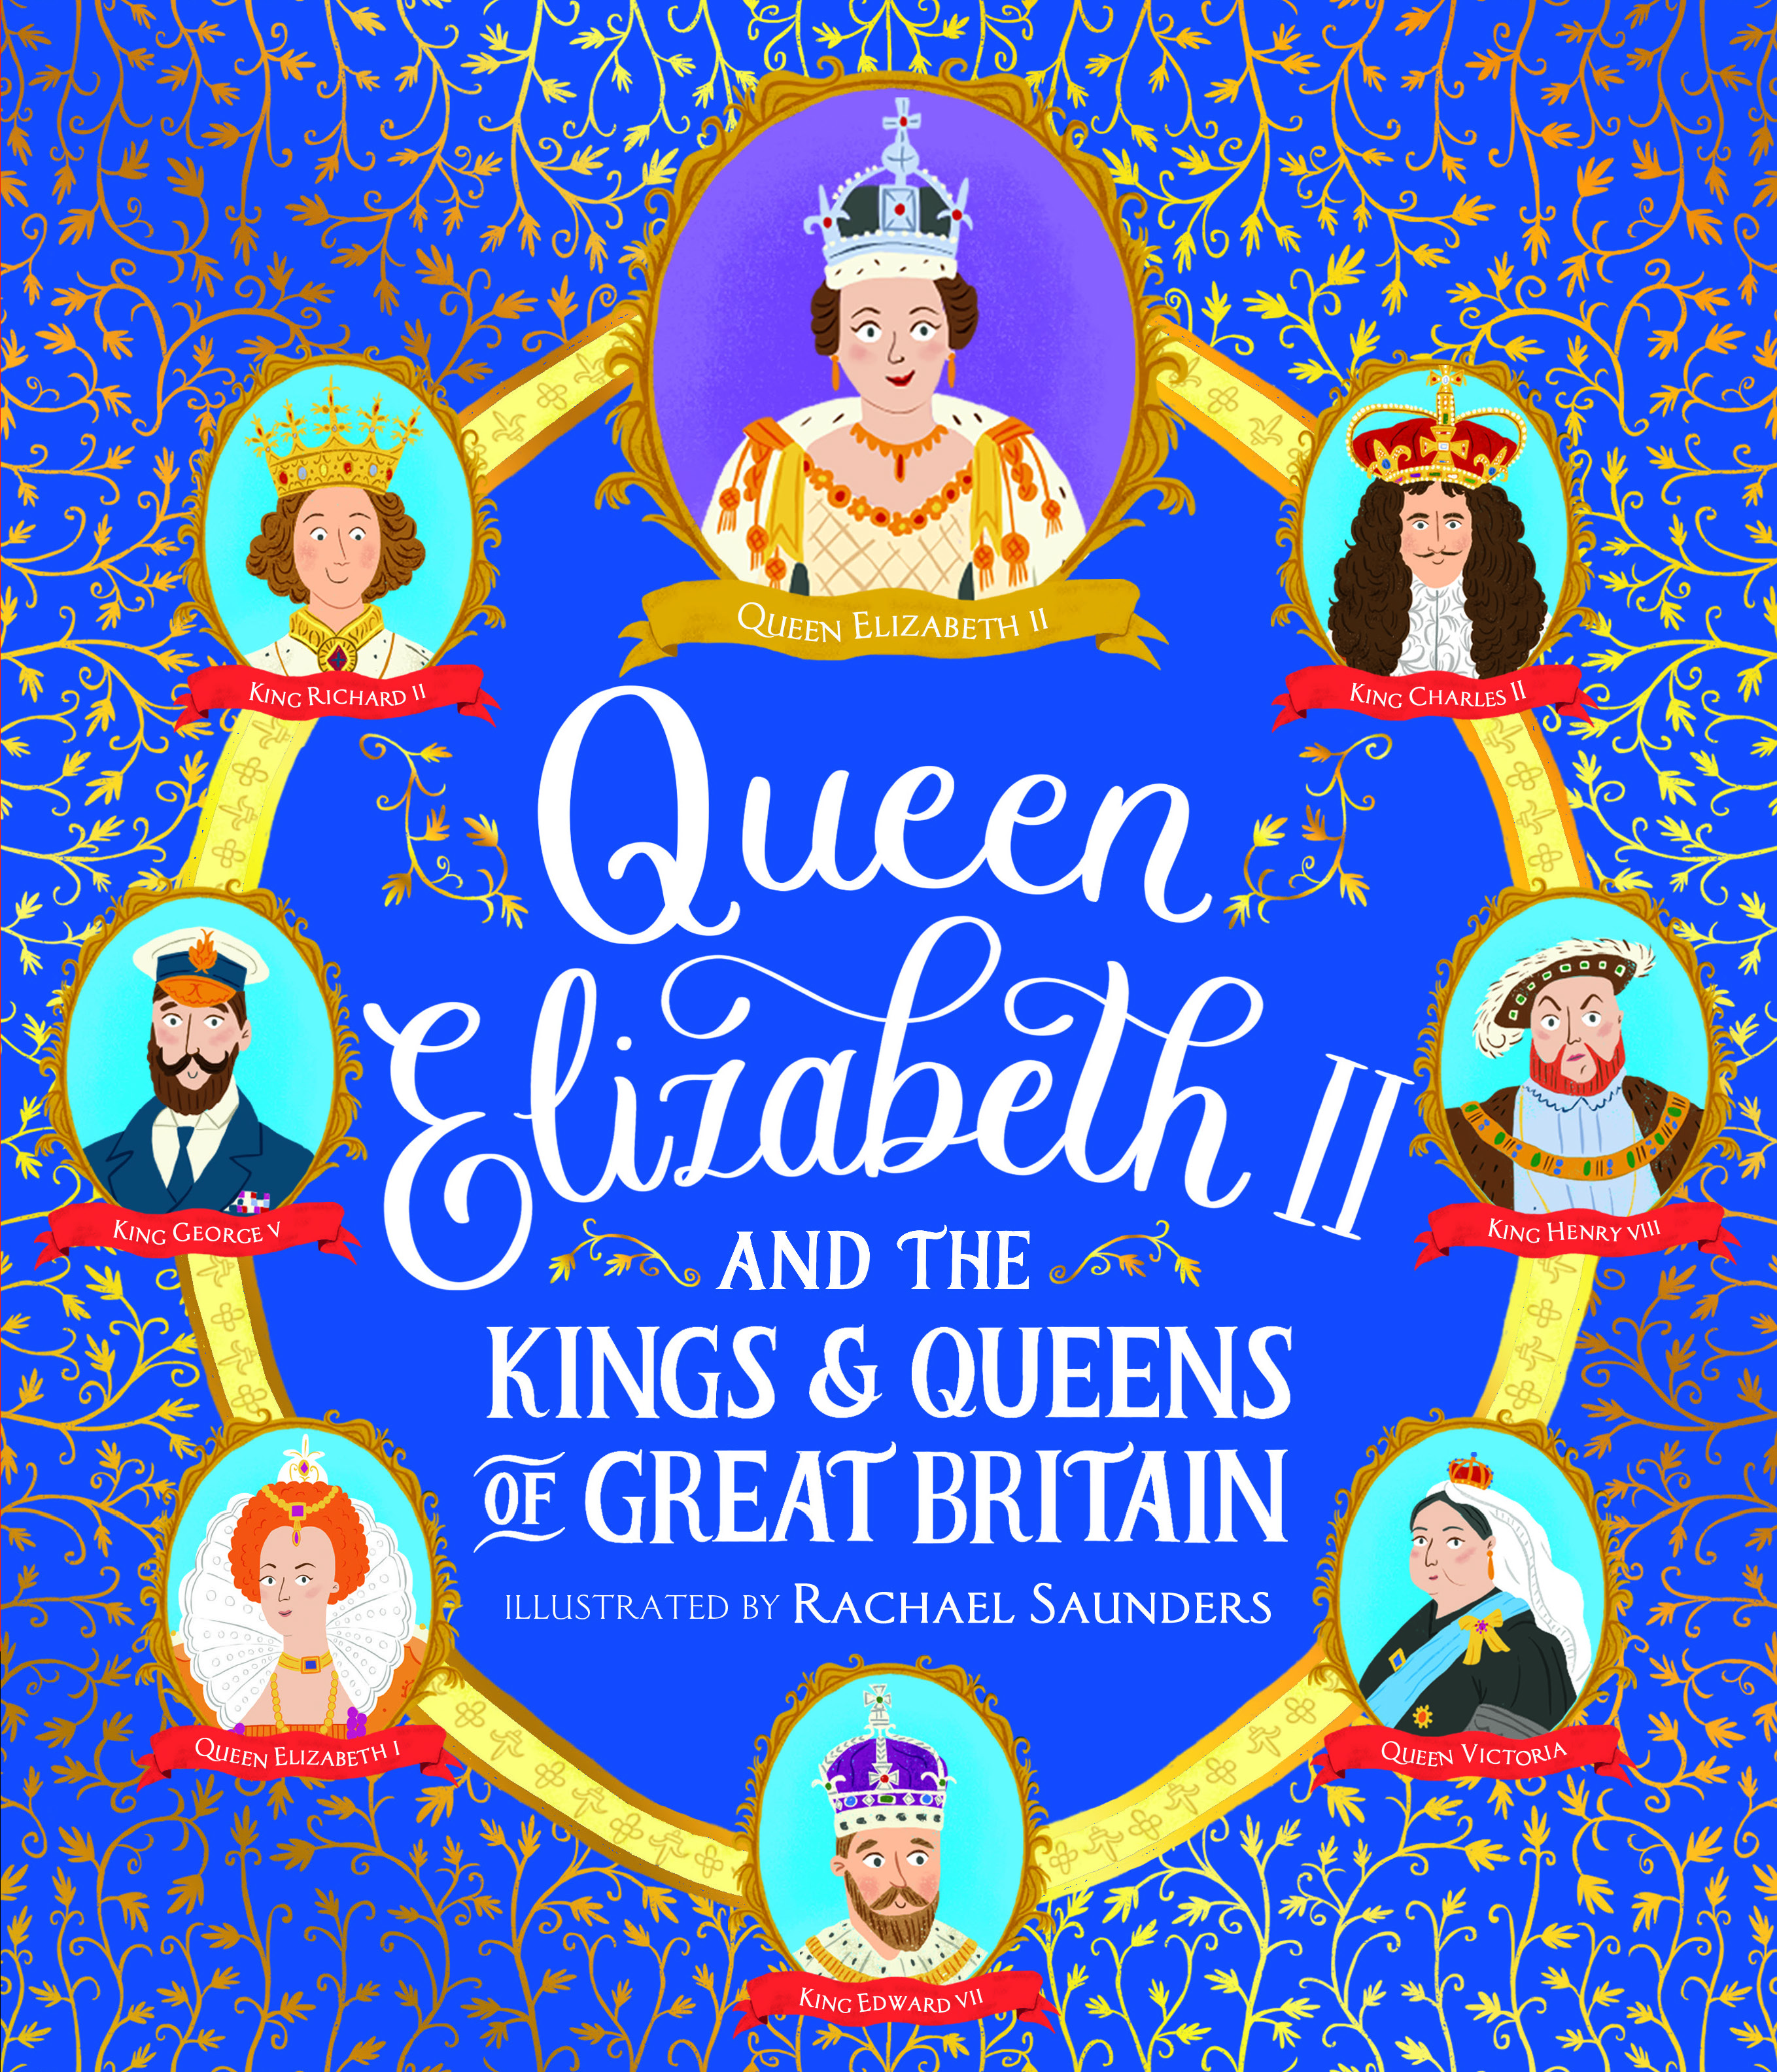 Queen-Elizabeth-II-and-the-Kings-and-Queens-of-Great-Britain